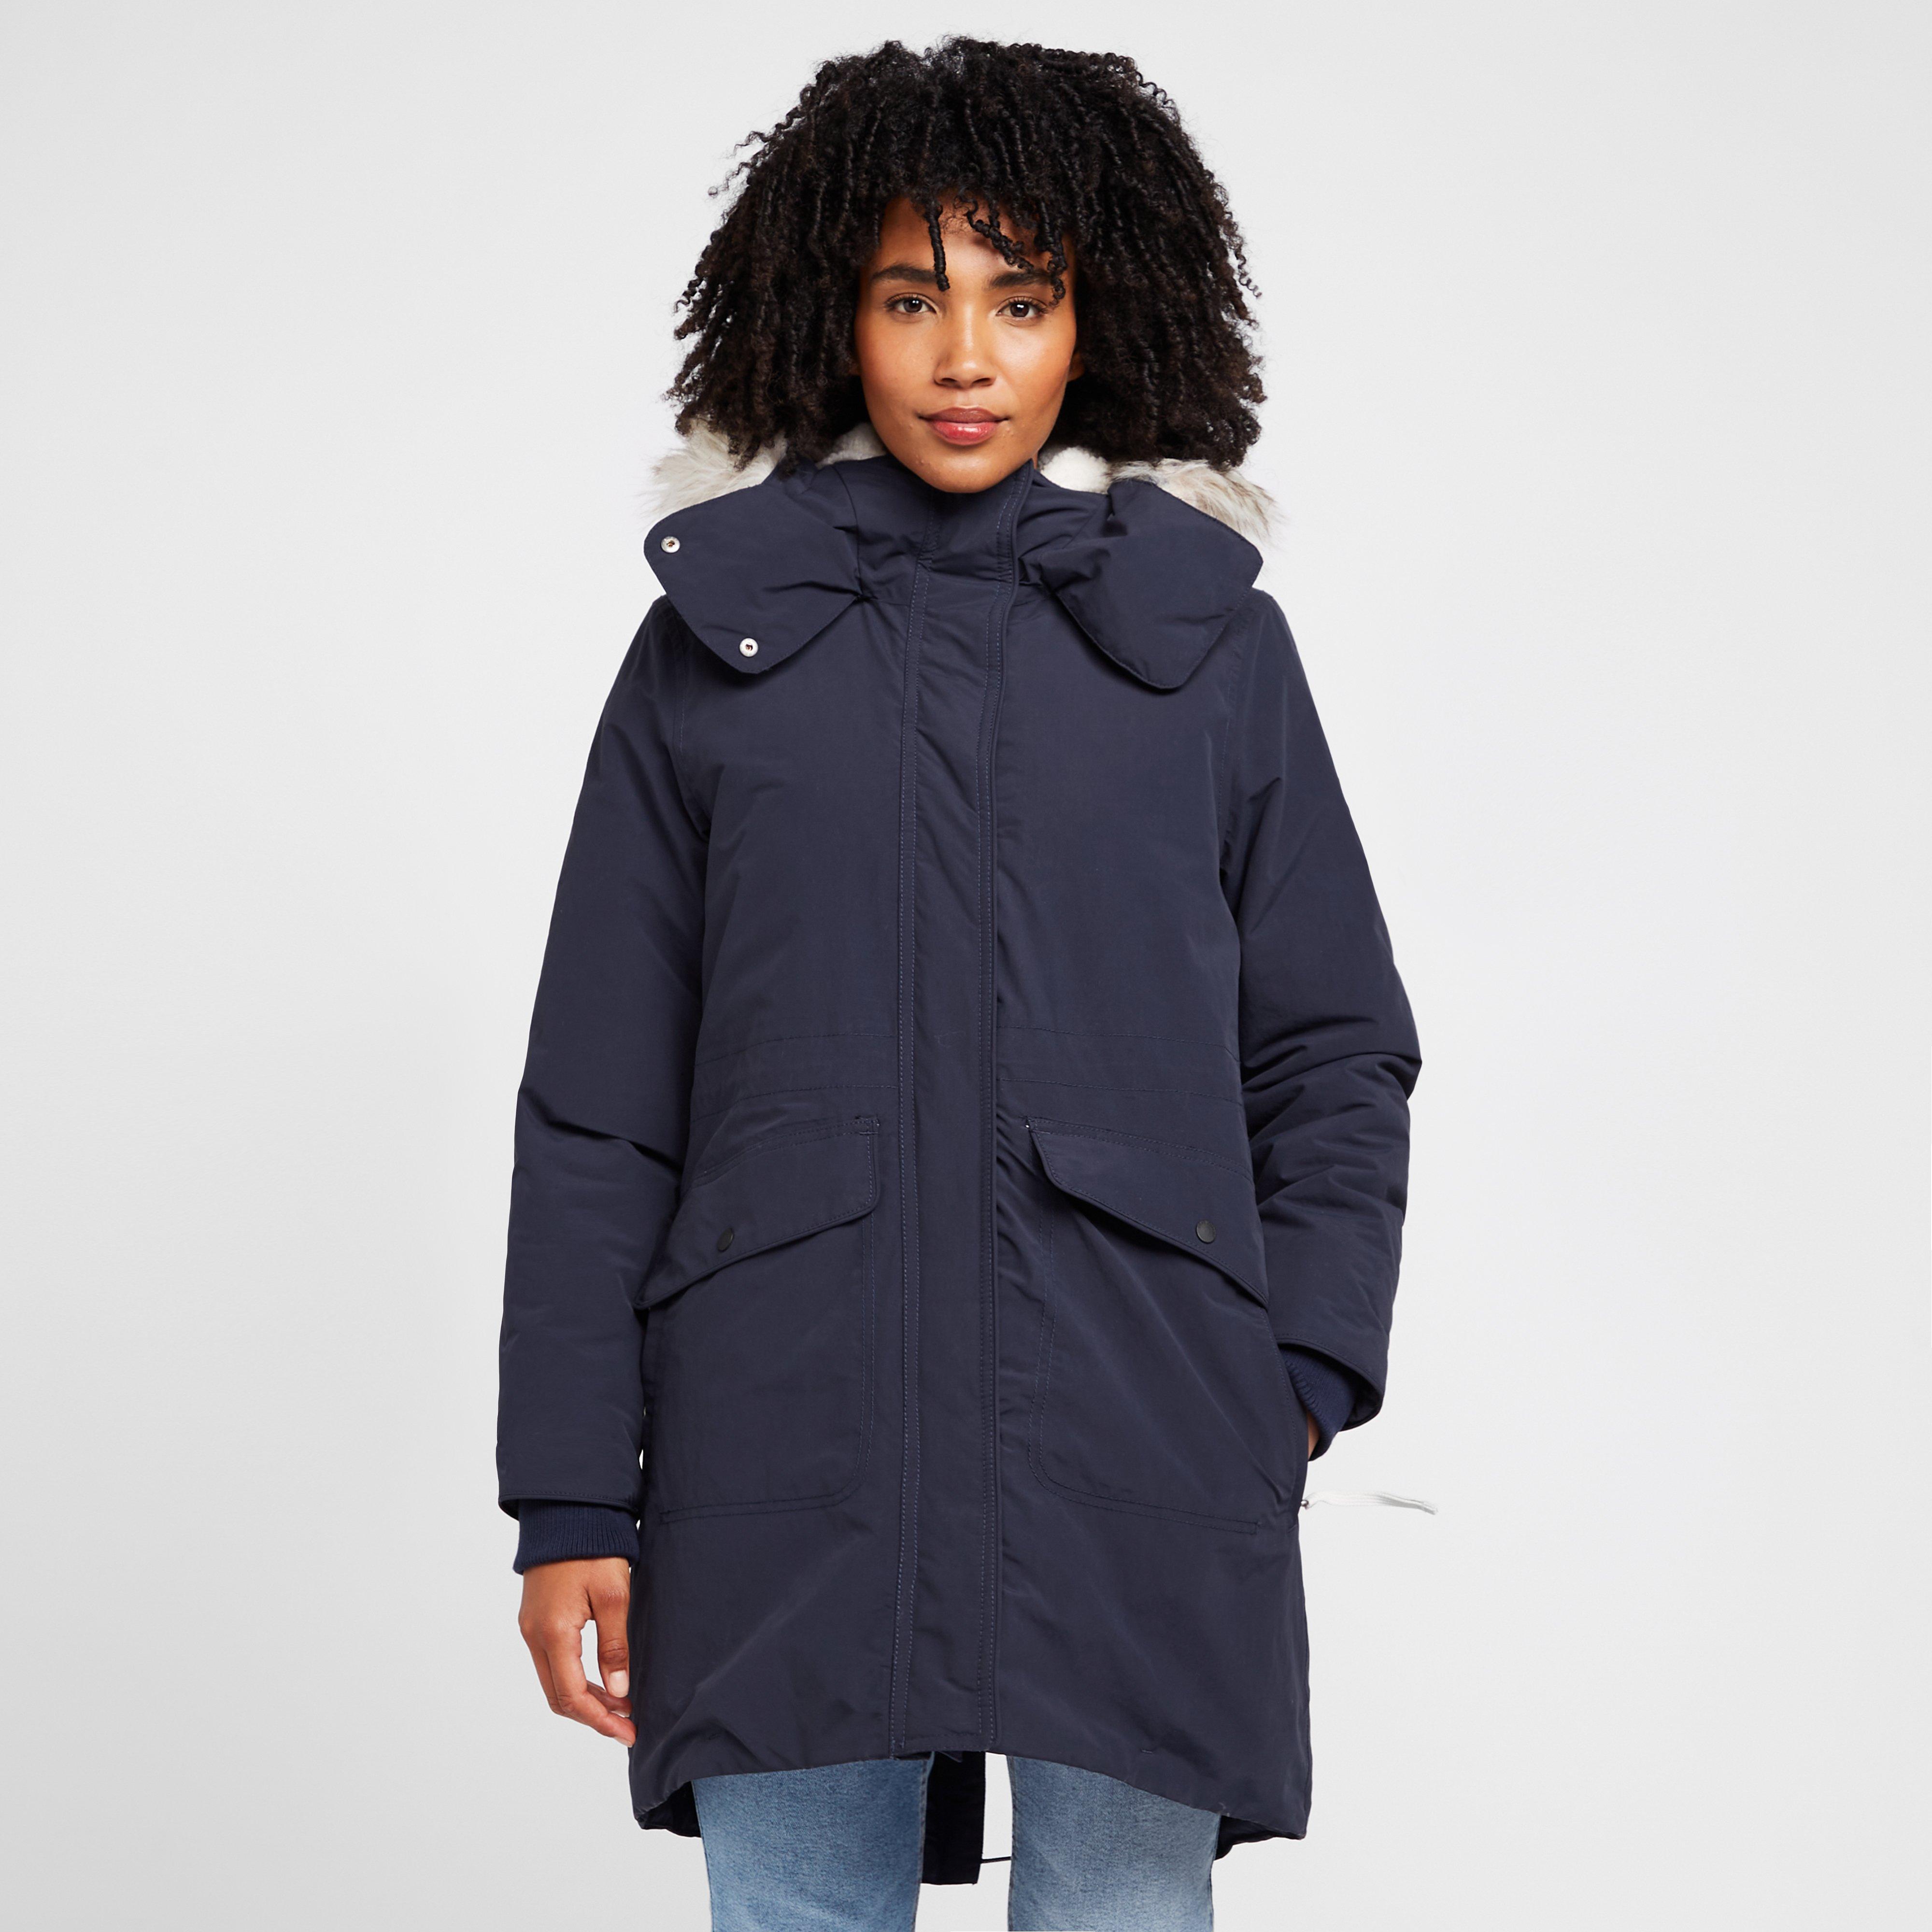 craghoppers women's lundale insulated jacket - navy, navy